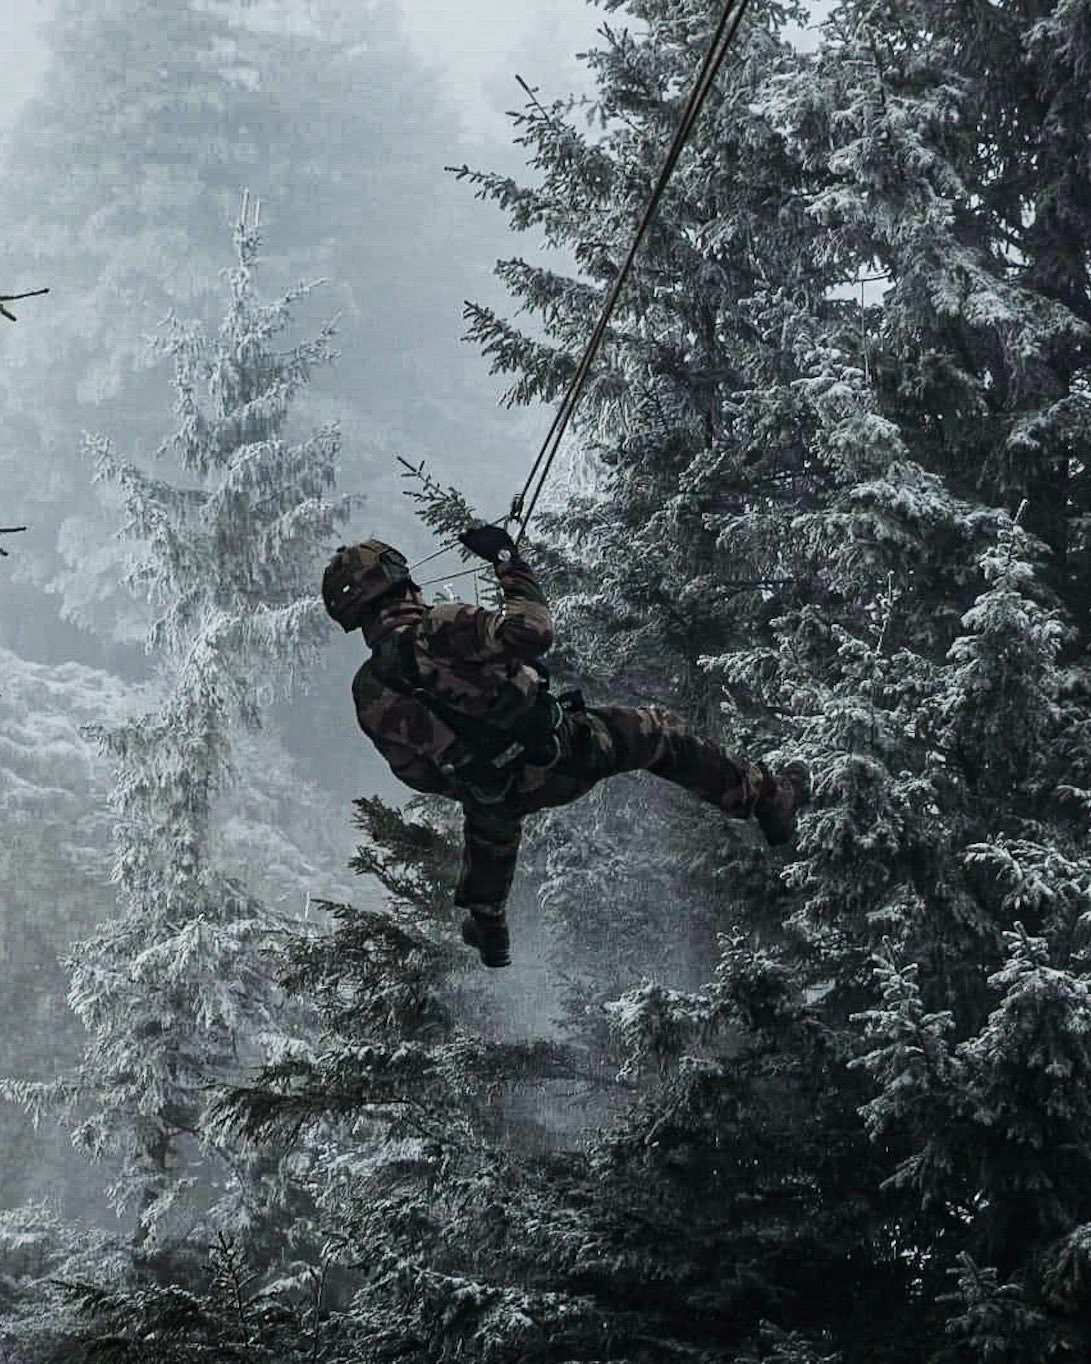 Romania's elite mountain troops train alongside their French Allies as part of NATO's multinational battlegroup in Romania. Pictured here: a soldier rappels from a massive pine tree in a snowy forest in Romania. 